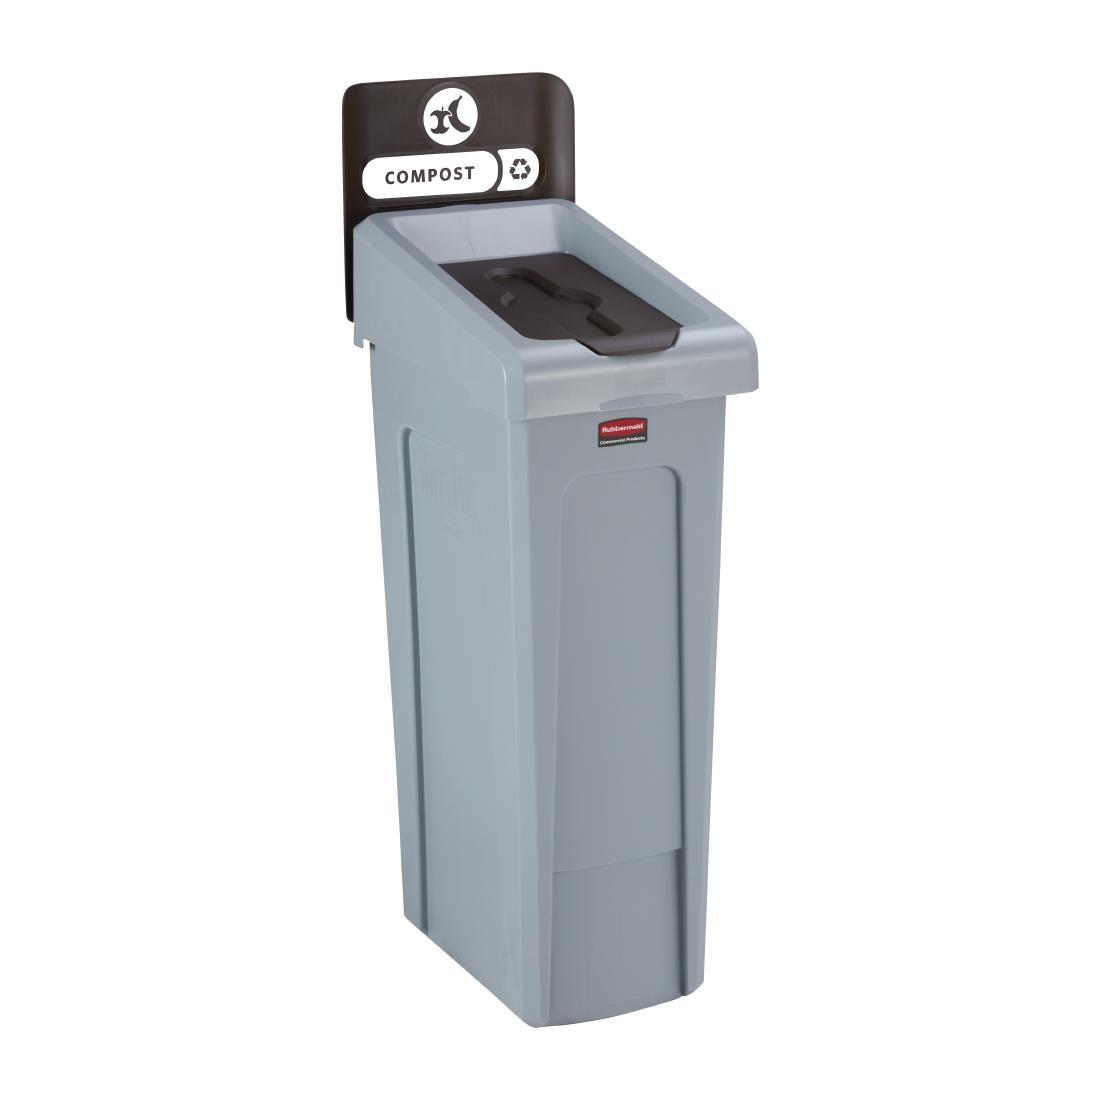 Rubbermaid Slim Jim Compost Recycling Station Brown 87Ltr - DY083  - 1